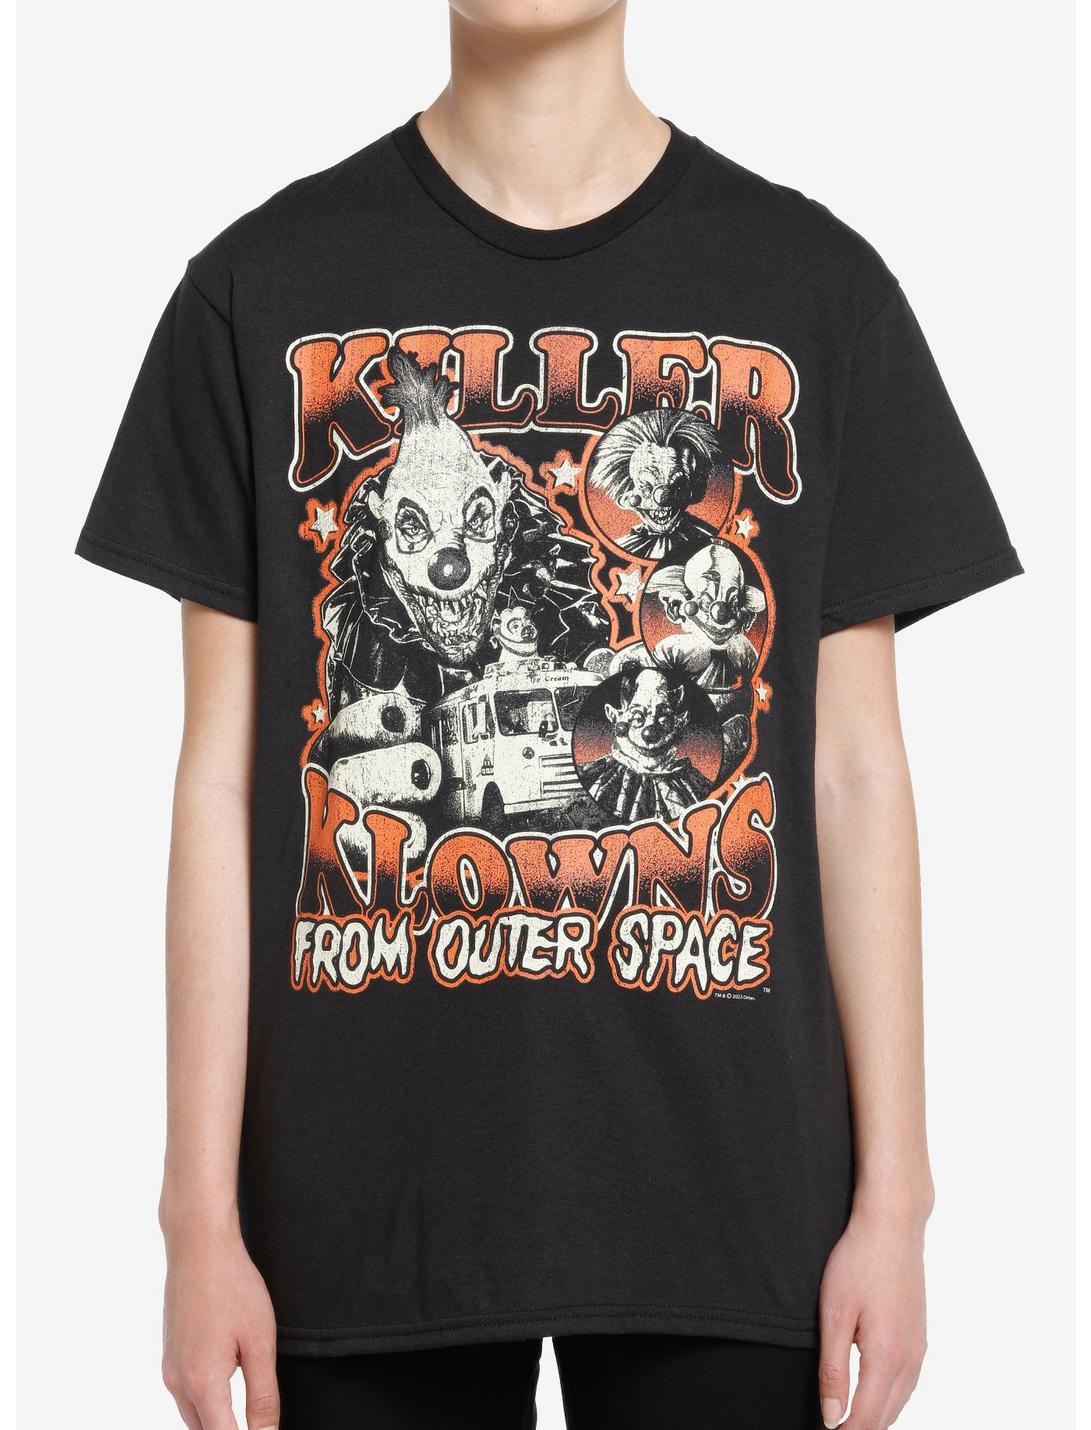 Killer Klowns From Outer Space Collage Boyfriend Fit Girls T-Shirt, MULTI, hi-res